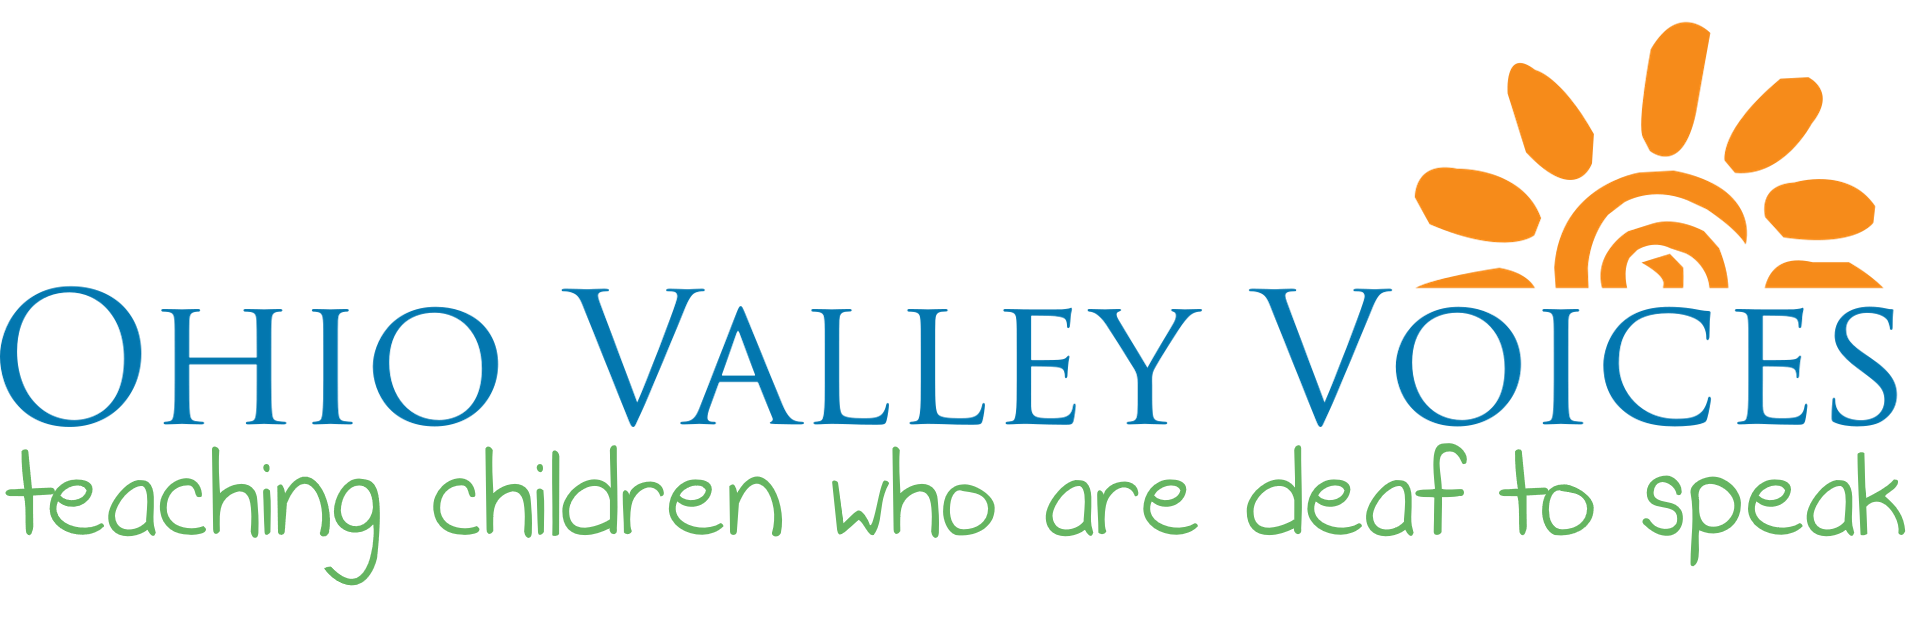 https://ohiovalleyvoices.org/wp-content/uploads/2022/05/cropped-Updated-Logo-1.png